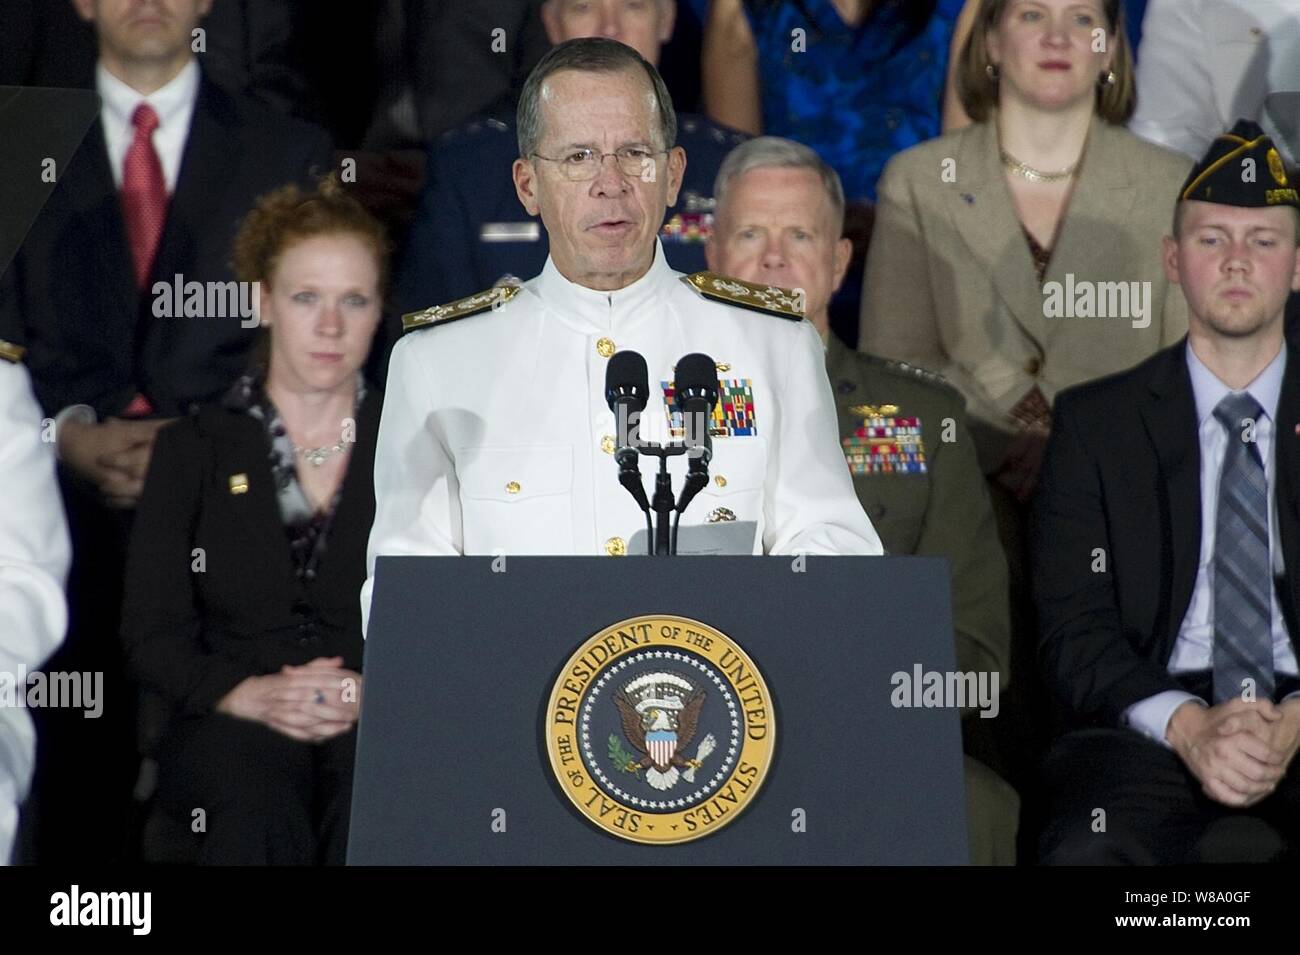 Chairman of the Joint Chiefs of Staff Adm. Mike Mullen introduces President of the United States Barack Obama at the Washington Navy Yard on Aug. 5, 2011.  Obama delivered remarks on the administration's initiative to help America's veterans find employment. Stock Photo